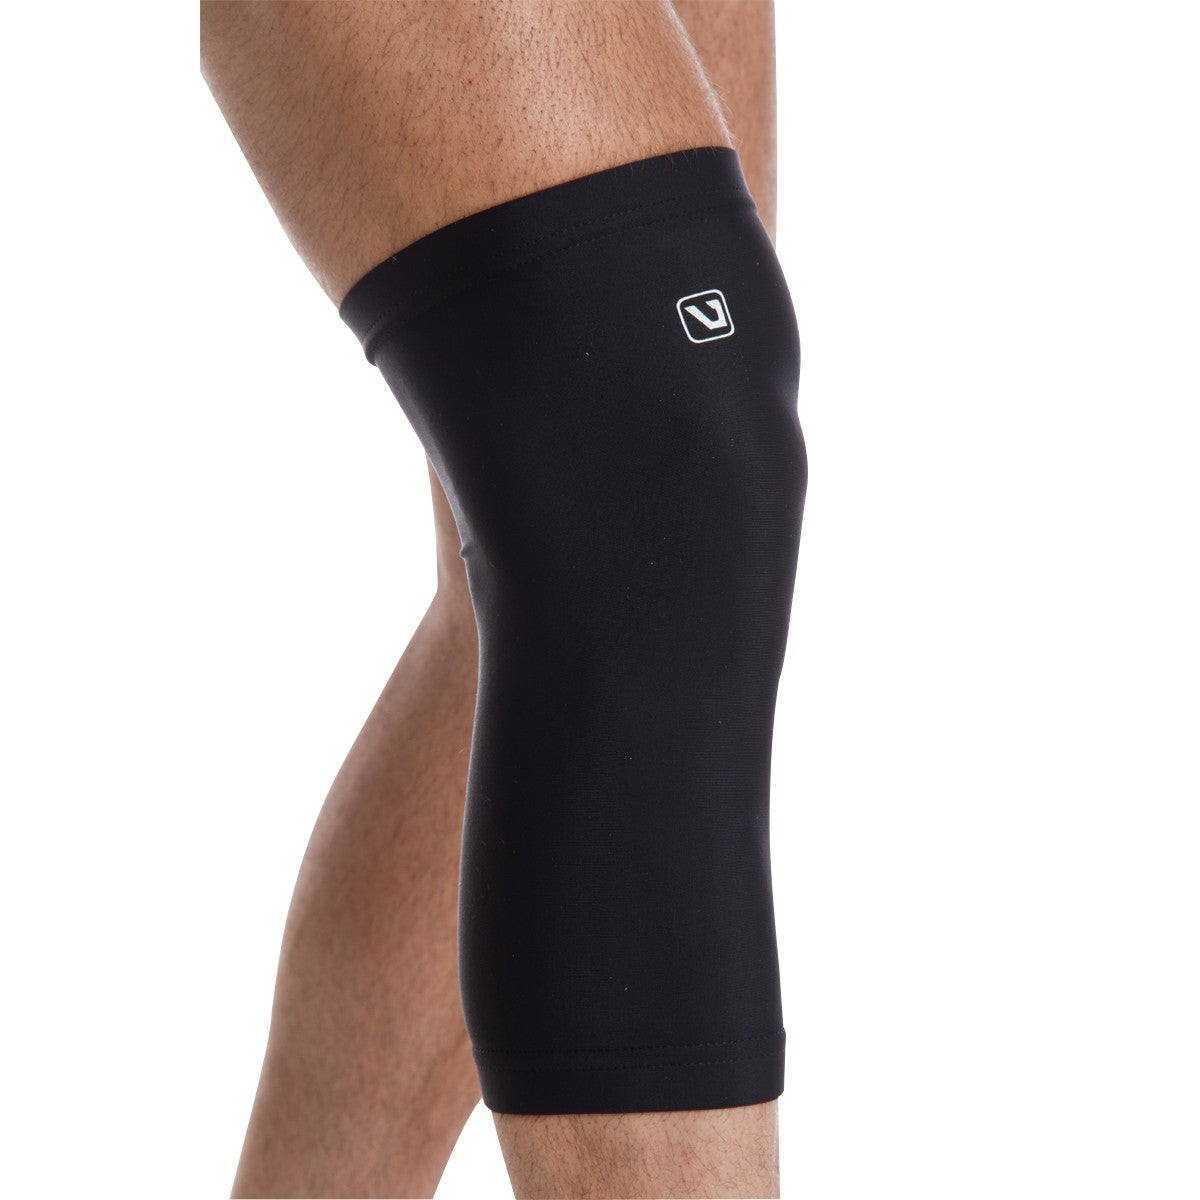 Live Up Slim Knee Support - S/M